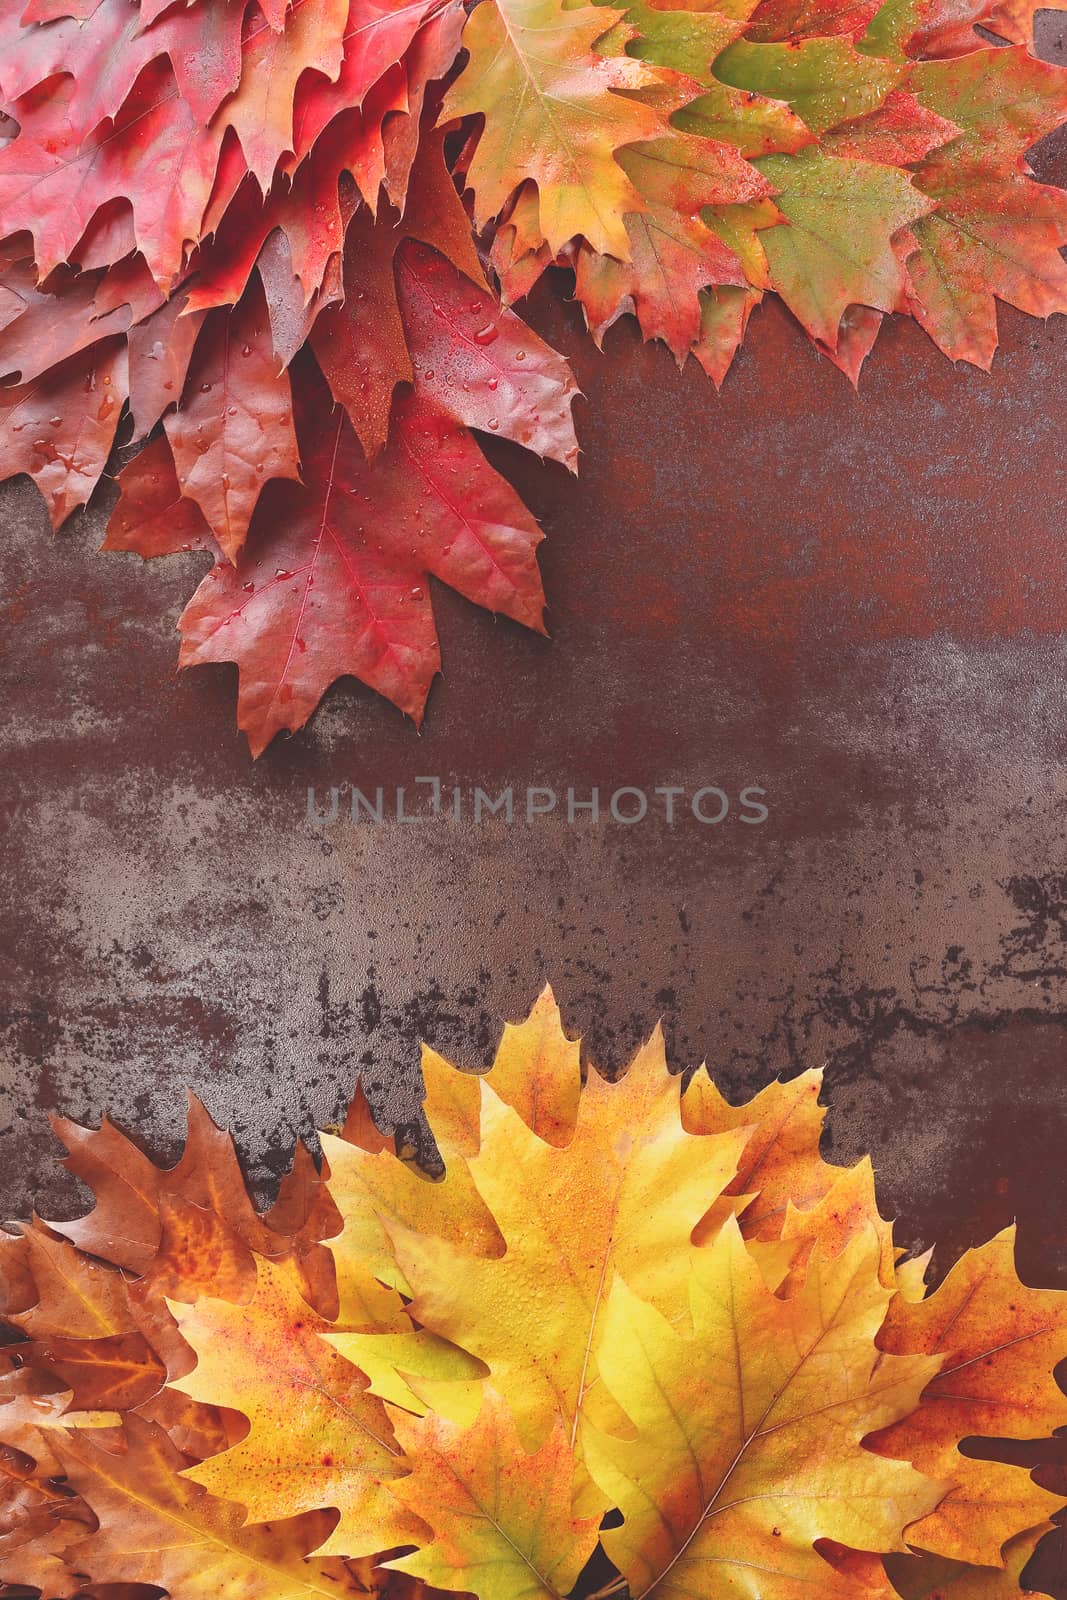 Red, yellow, brown and green autumn Oak Leaves over rustic background. Autumn foliage.